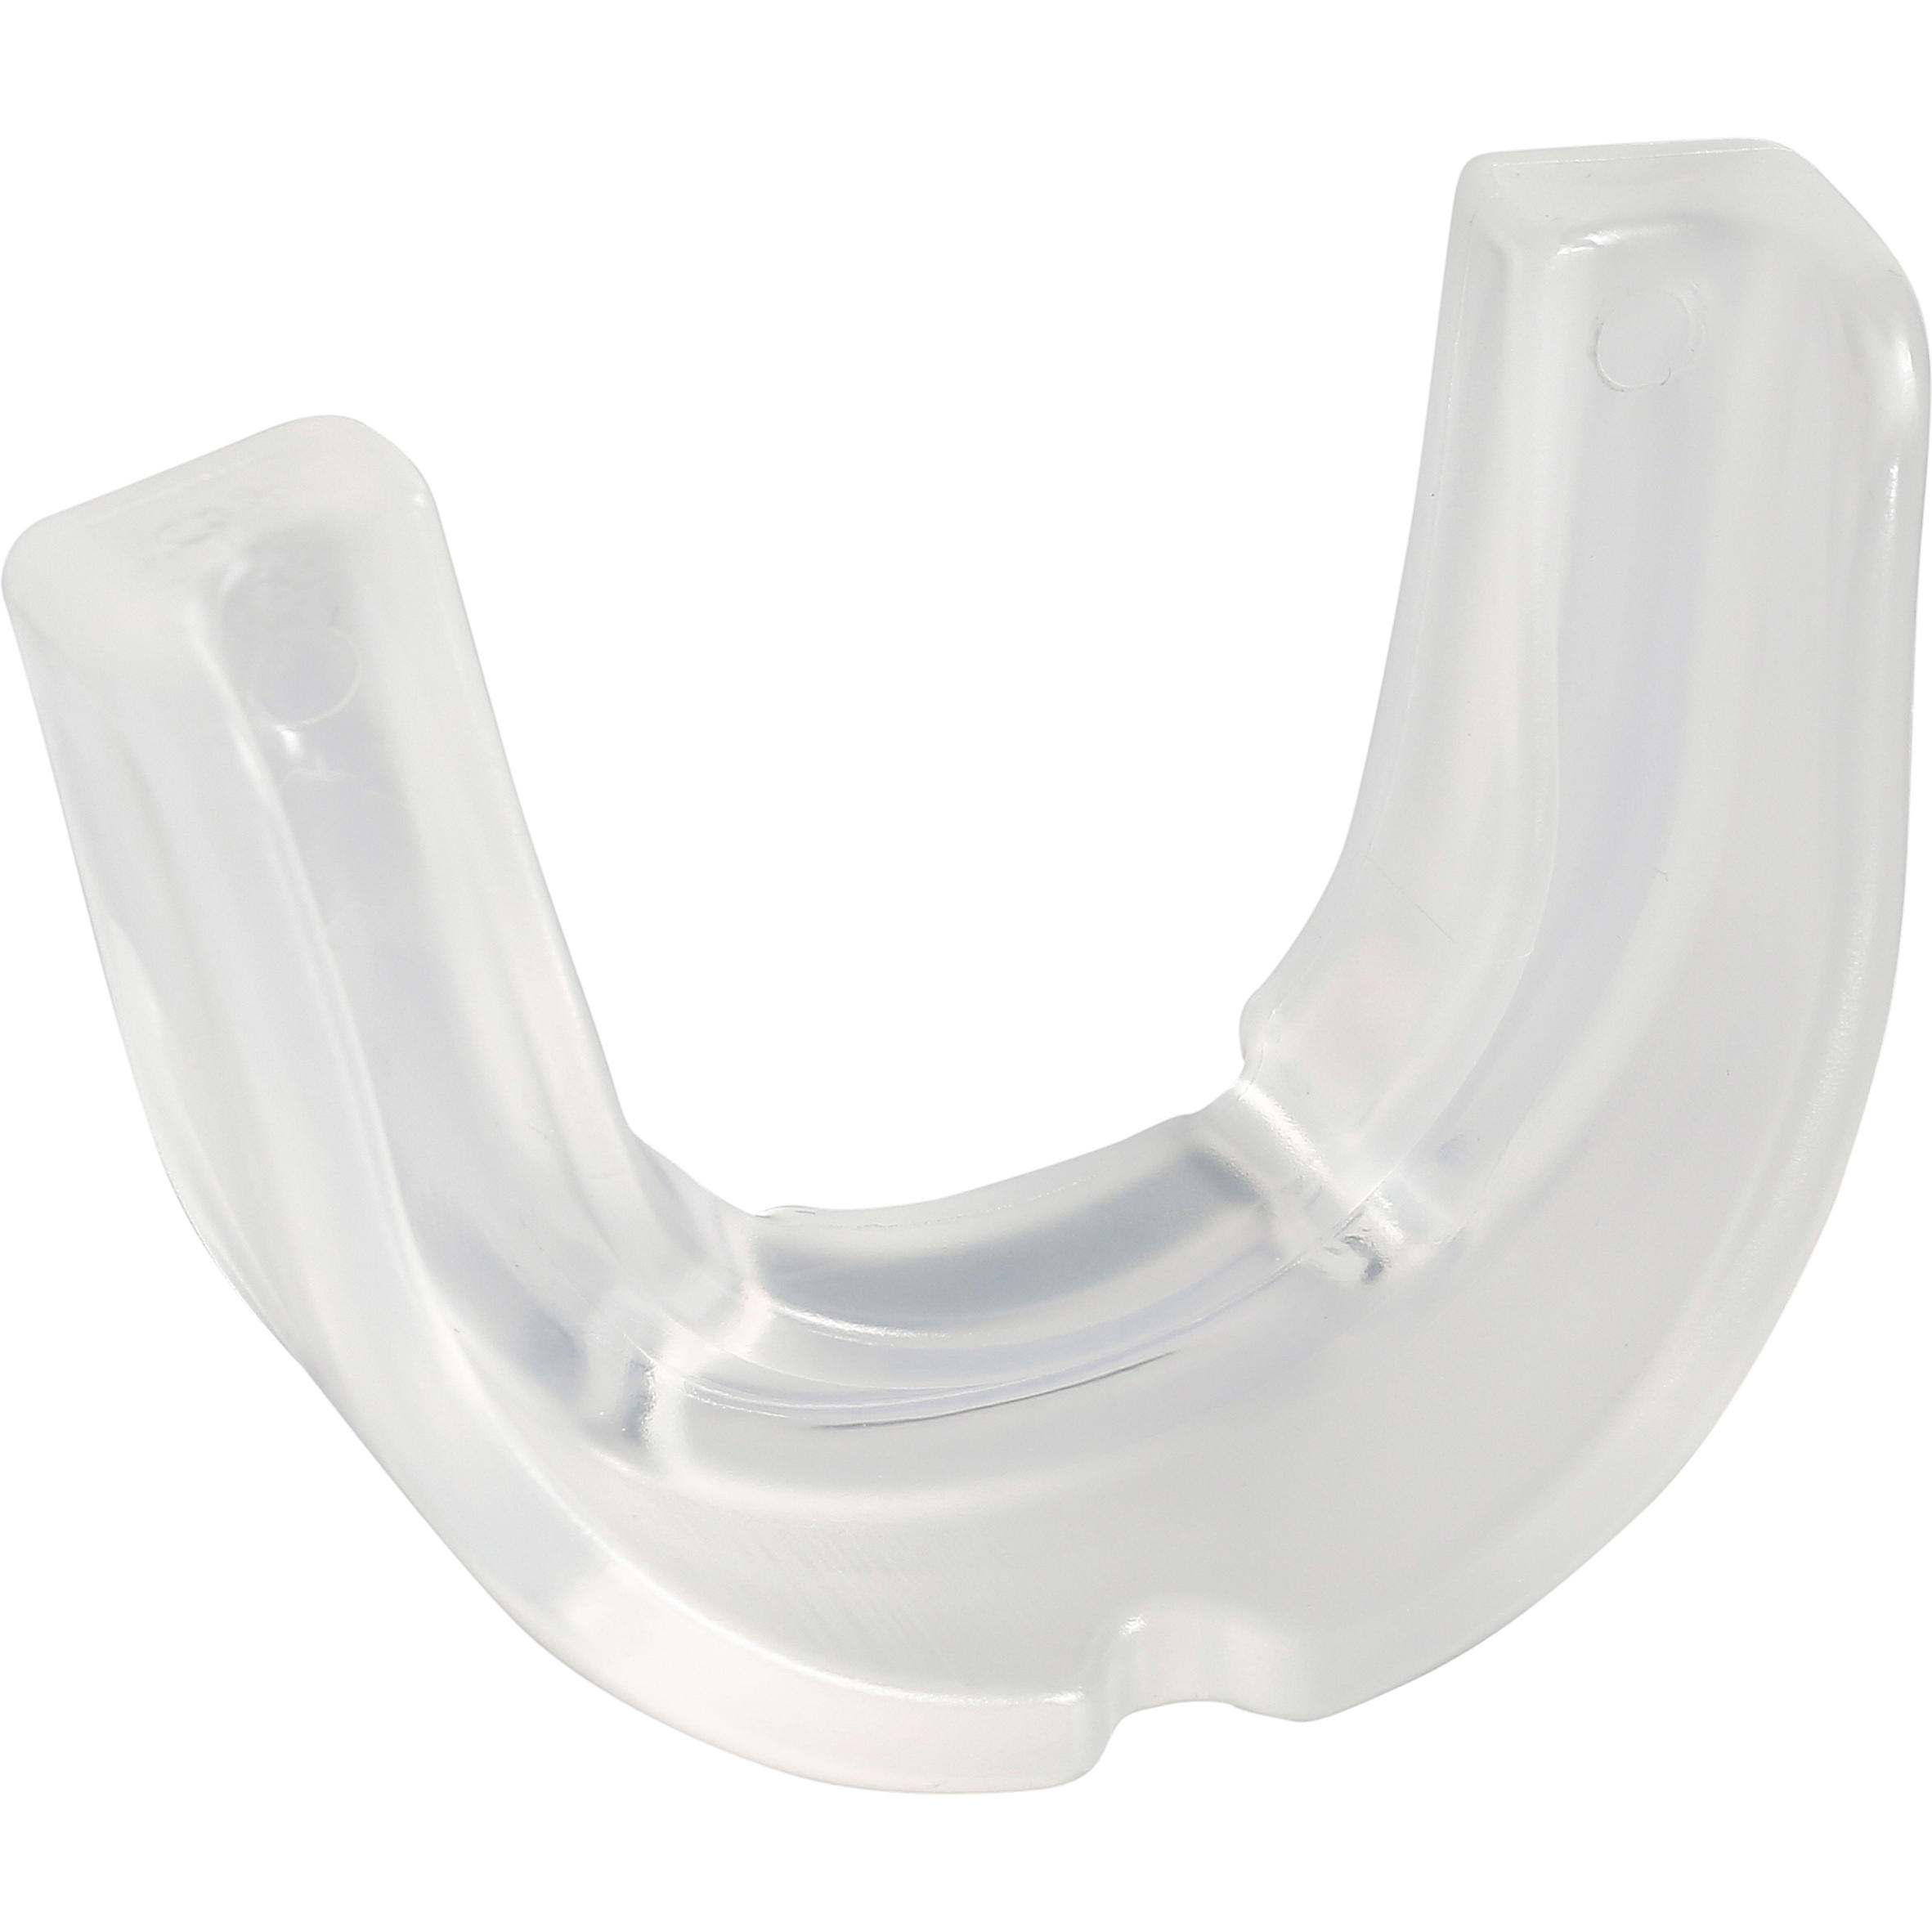 Adult Large Low-Intensity Field Hockey Mouthguard FH100 - Transparent 5/5